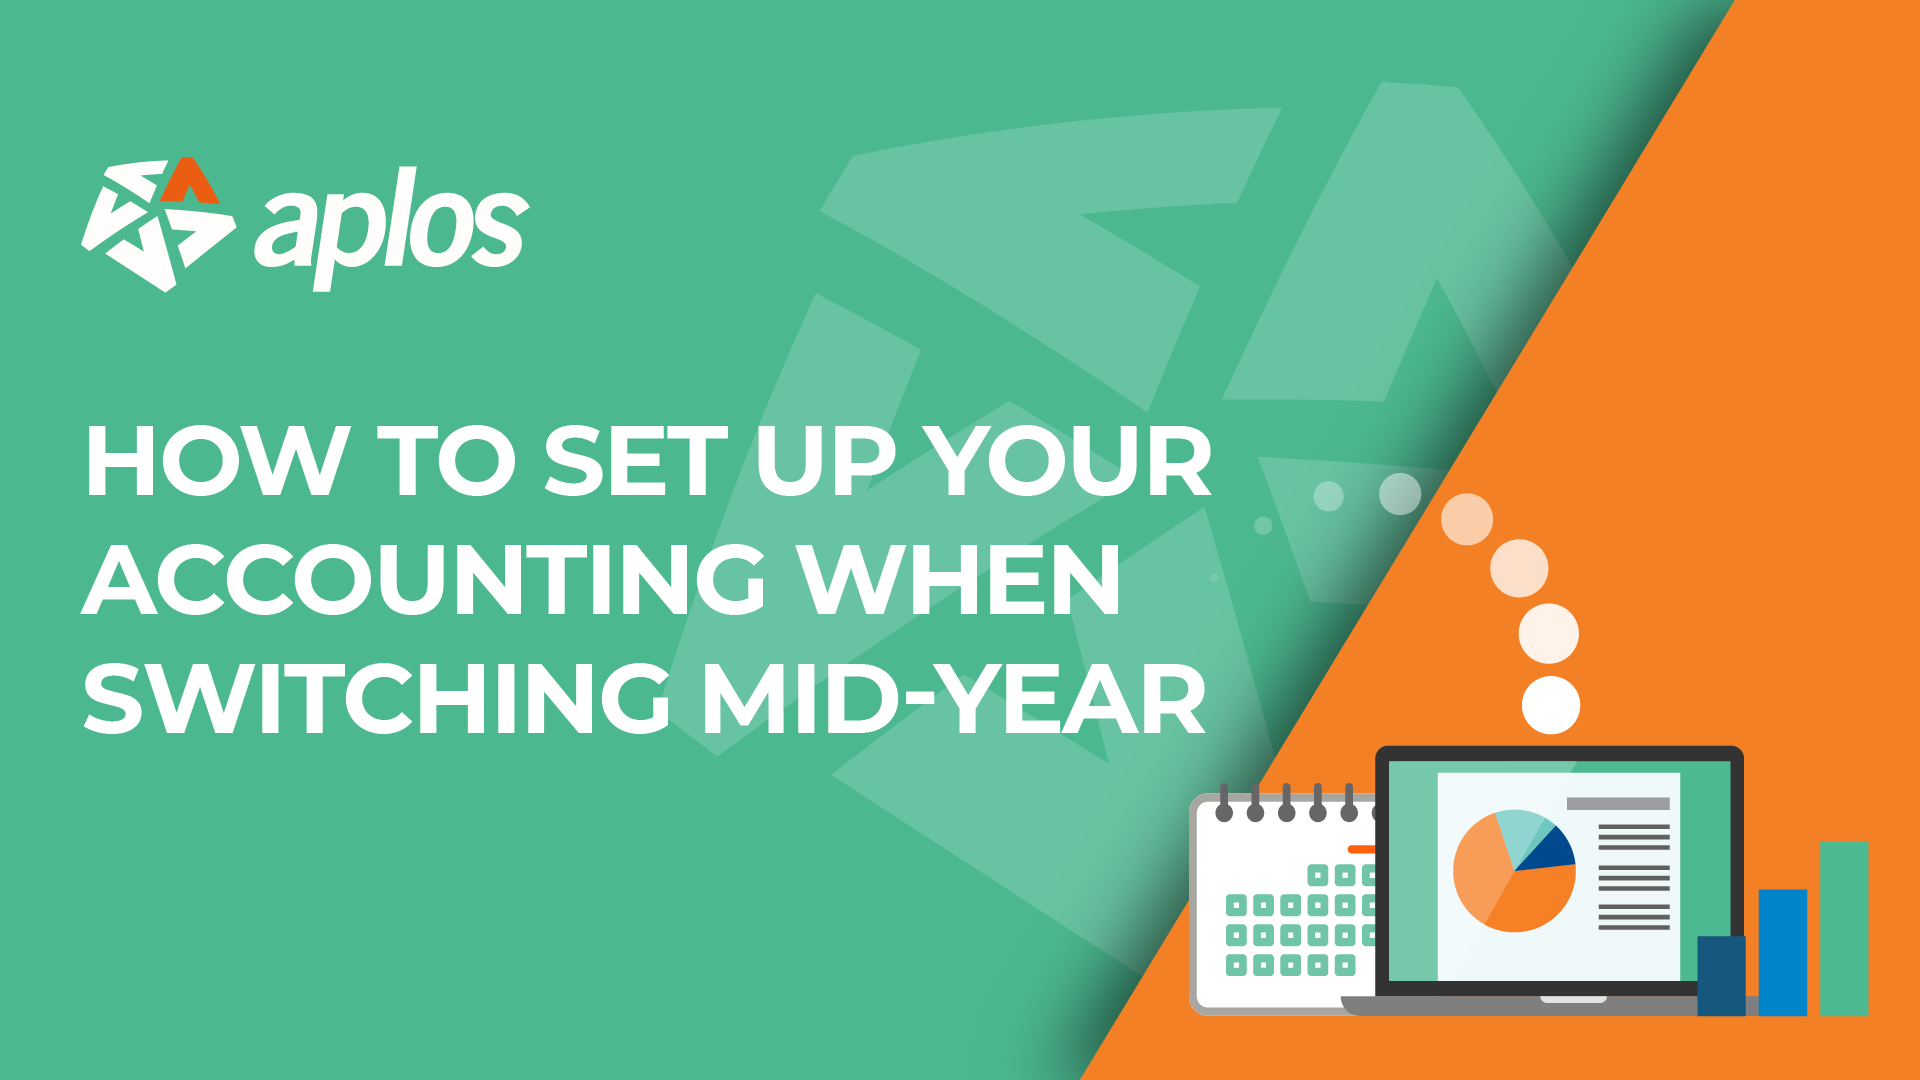 WATCH: How To Set Up Accounting When Switching Mid-Year - Aplos ...